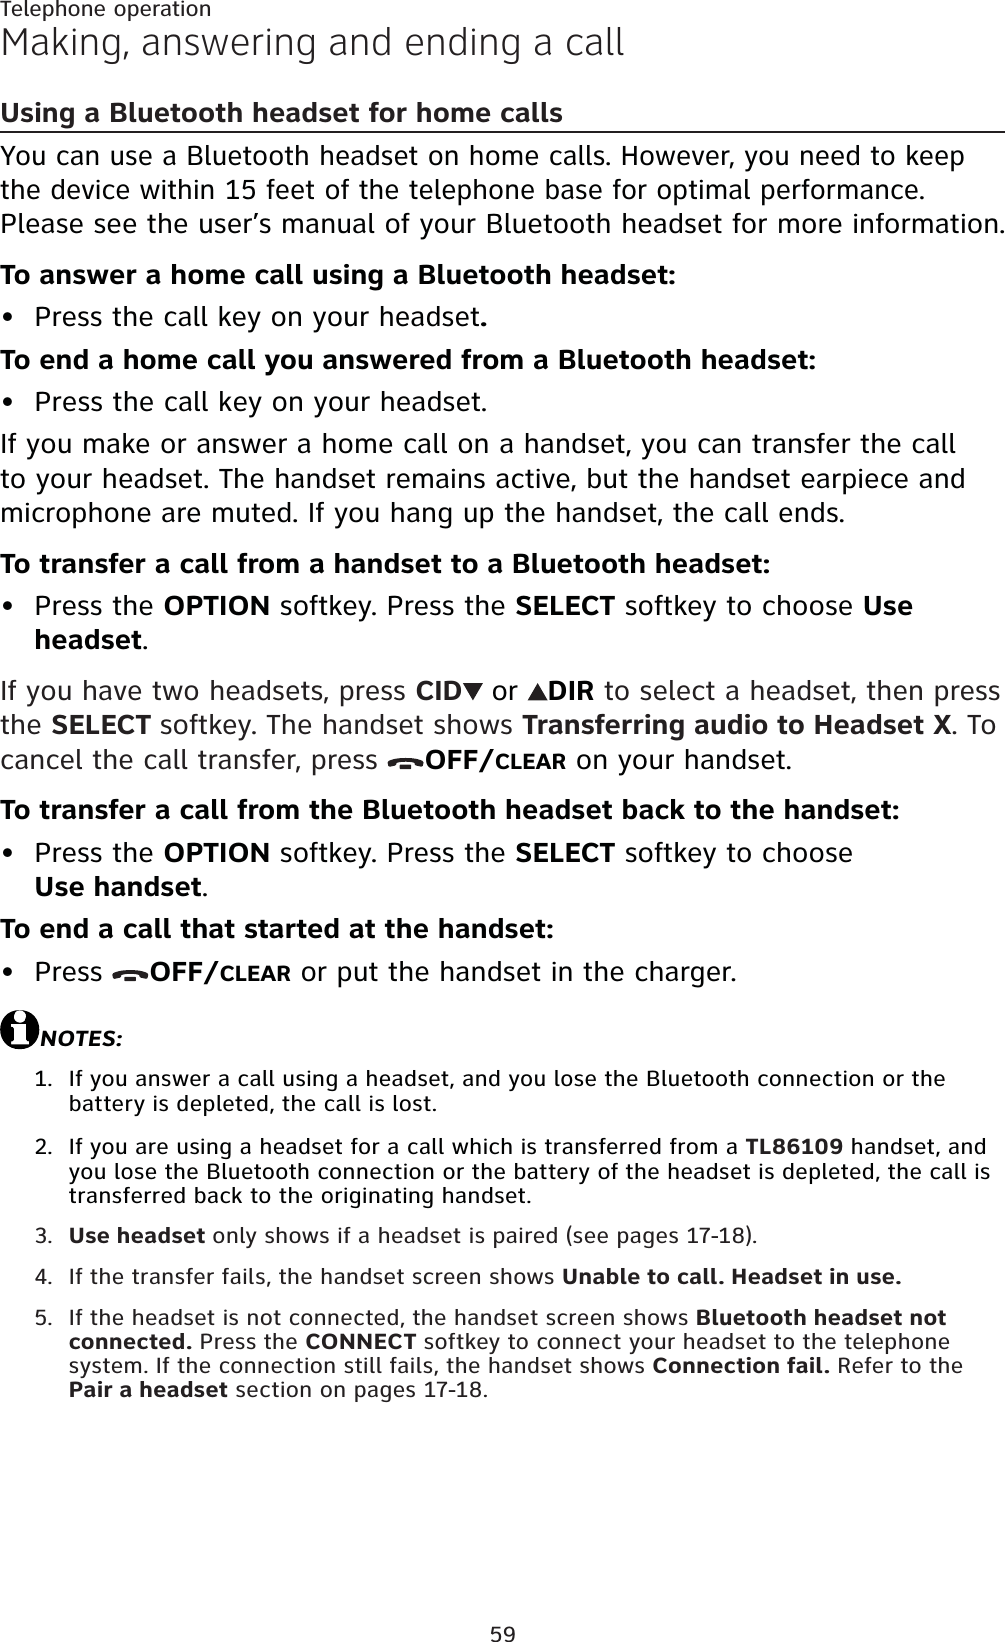 59Telephone operationMaking, answering and ending a callUsing a Bluetooth headset for home callsYou can use a Bluetooth headset on home calls. However, you need to keep the device within 15 feet of the telephone base for optimal performance.Please see the user’s manual of your Bluetooth headset for more information.To answer a home call using a Bluetooth headset:Press the call key on your headset.To end a home call you answered from a Bluetooth headset:Press the call key on your headset.If you make or answer a home call on a handset, you can transfer the call to your headset. The handset remains active, but the handset earpiece and microphone are muted. If you hang up the handset, the call ends.To transfer a call from a handset to a Bluetooth headset:Press the OPTION softkey. Press the SELECT softkey to choose Useheadset.If you have two headsets, press CID or DIR to select a headset, then press the SELECT softkey. The handset shows Transferring audio to Headset X. To cancel the call transfer, press  OFF/CLEAR on your handset.To transfer a call from the Bluetooth headset back to the handset:Press the OPTION softkey. Press the SELECT softkey to chooseUse handset.To end a call that started at the handset:Press  OFF/CLEAR or put the handset in the charger.NOTES:If you answer a call using a headset, and you lose the Bluetooth connection or the battery is depleted, the call is lost.If you are using a headset for a call which is transferred from a TL86109 handset, and you lose the Bluetooth connection or the battery of the headset is depleted, the call is transferred back to the originating handset.Use headset only shows if a headset is paired (see pages 17-18).If the transfer fails, the handset screen shows Unable to call. Headset in use.If the headset is not connected, the handset screen shows Bluetooth headset not connected. Press the CONNECT softkey to connect your headset to the telephone system. If the connection still fails, the handset shows Connection fail. Refer to the Pair a headset section on pages 17-18.•••••1.2.3.4.5.